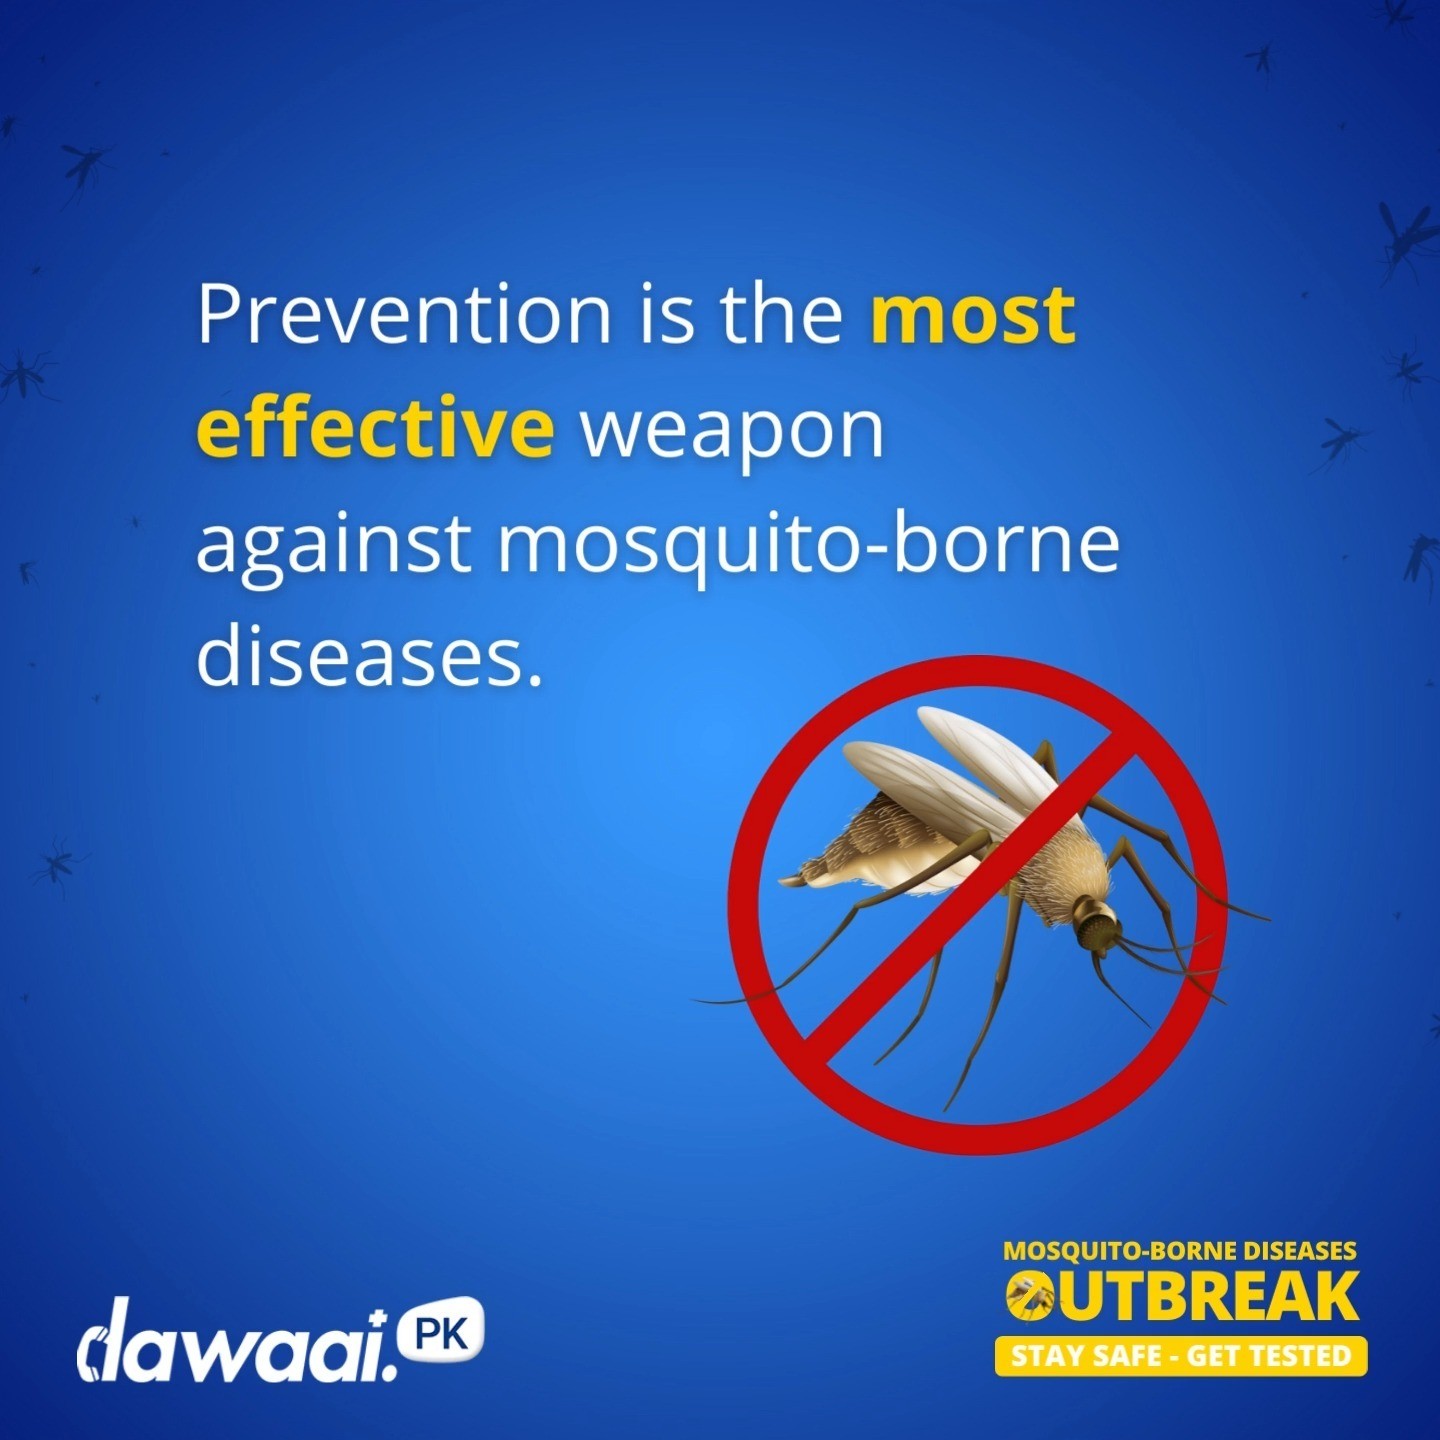 An ounce of prevention is better than a pound of cure!
Using preventive measures is the best way to fight mosquito-borne diseases like #Malaria & #Dengue.
Always make sure to use mosquito repellents on exposed skin to stay safe! 
Buy now: https://bit.ly/3x3hguv